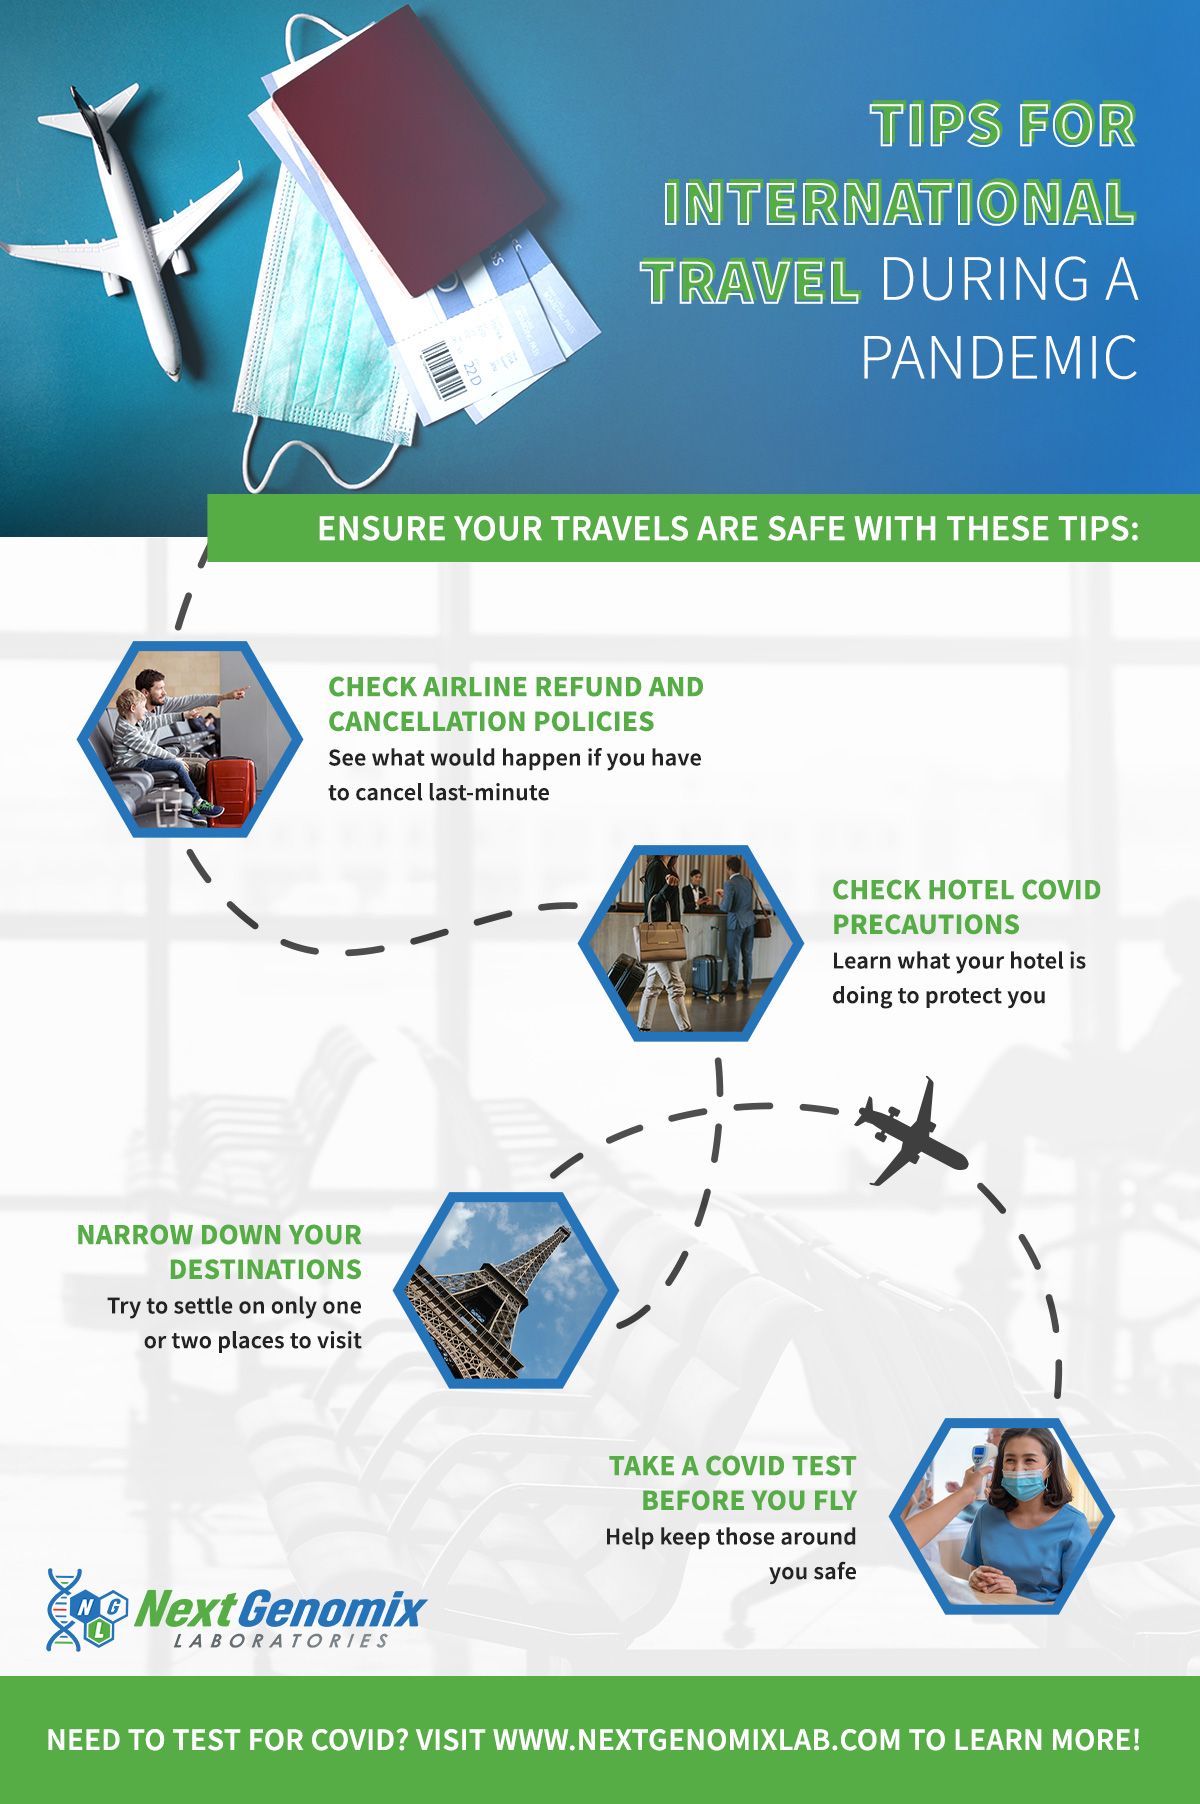 M33792 - Next Genomix Laboratory_Tips for International Travel During a Pandemic_Infographic.jpg